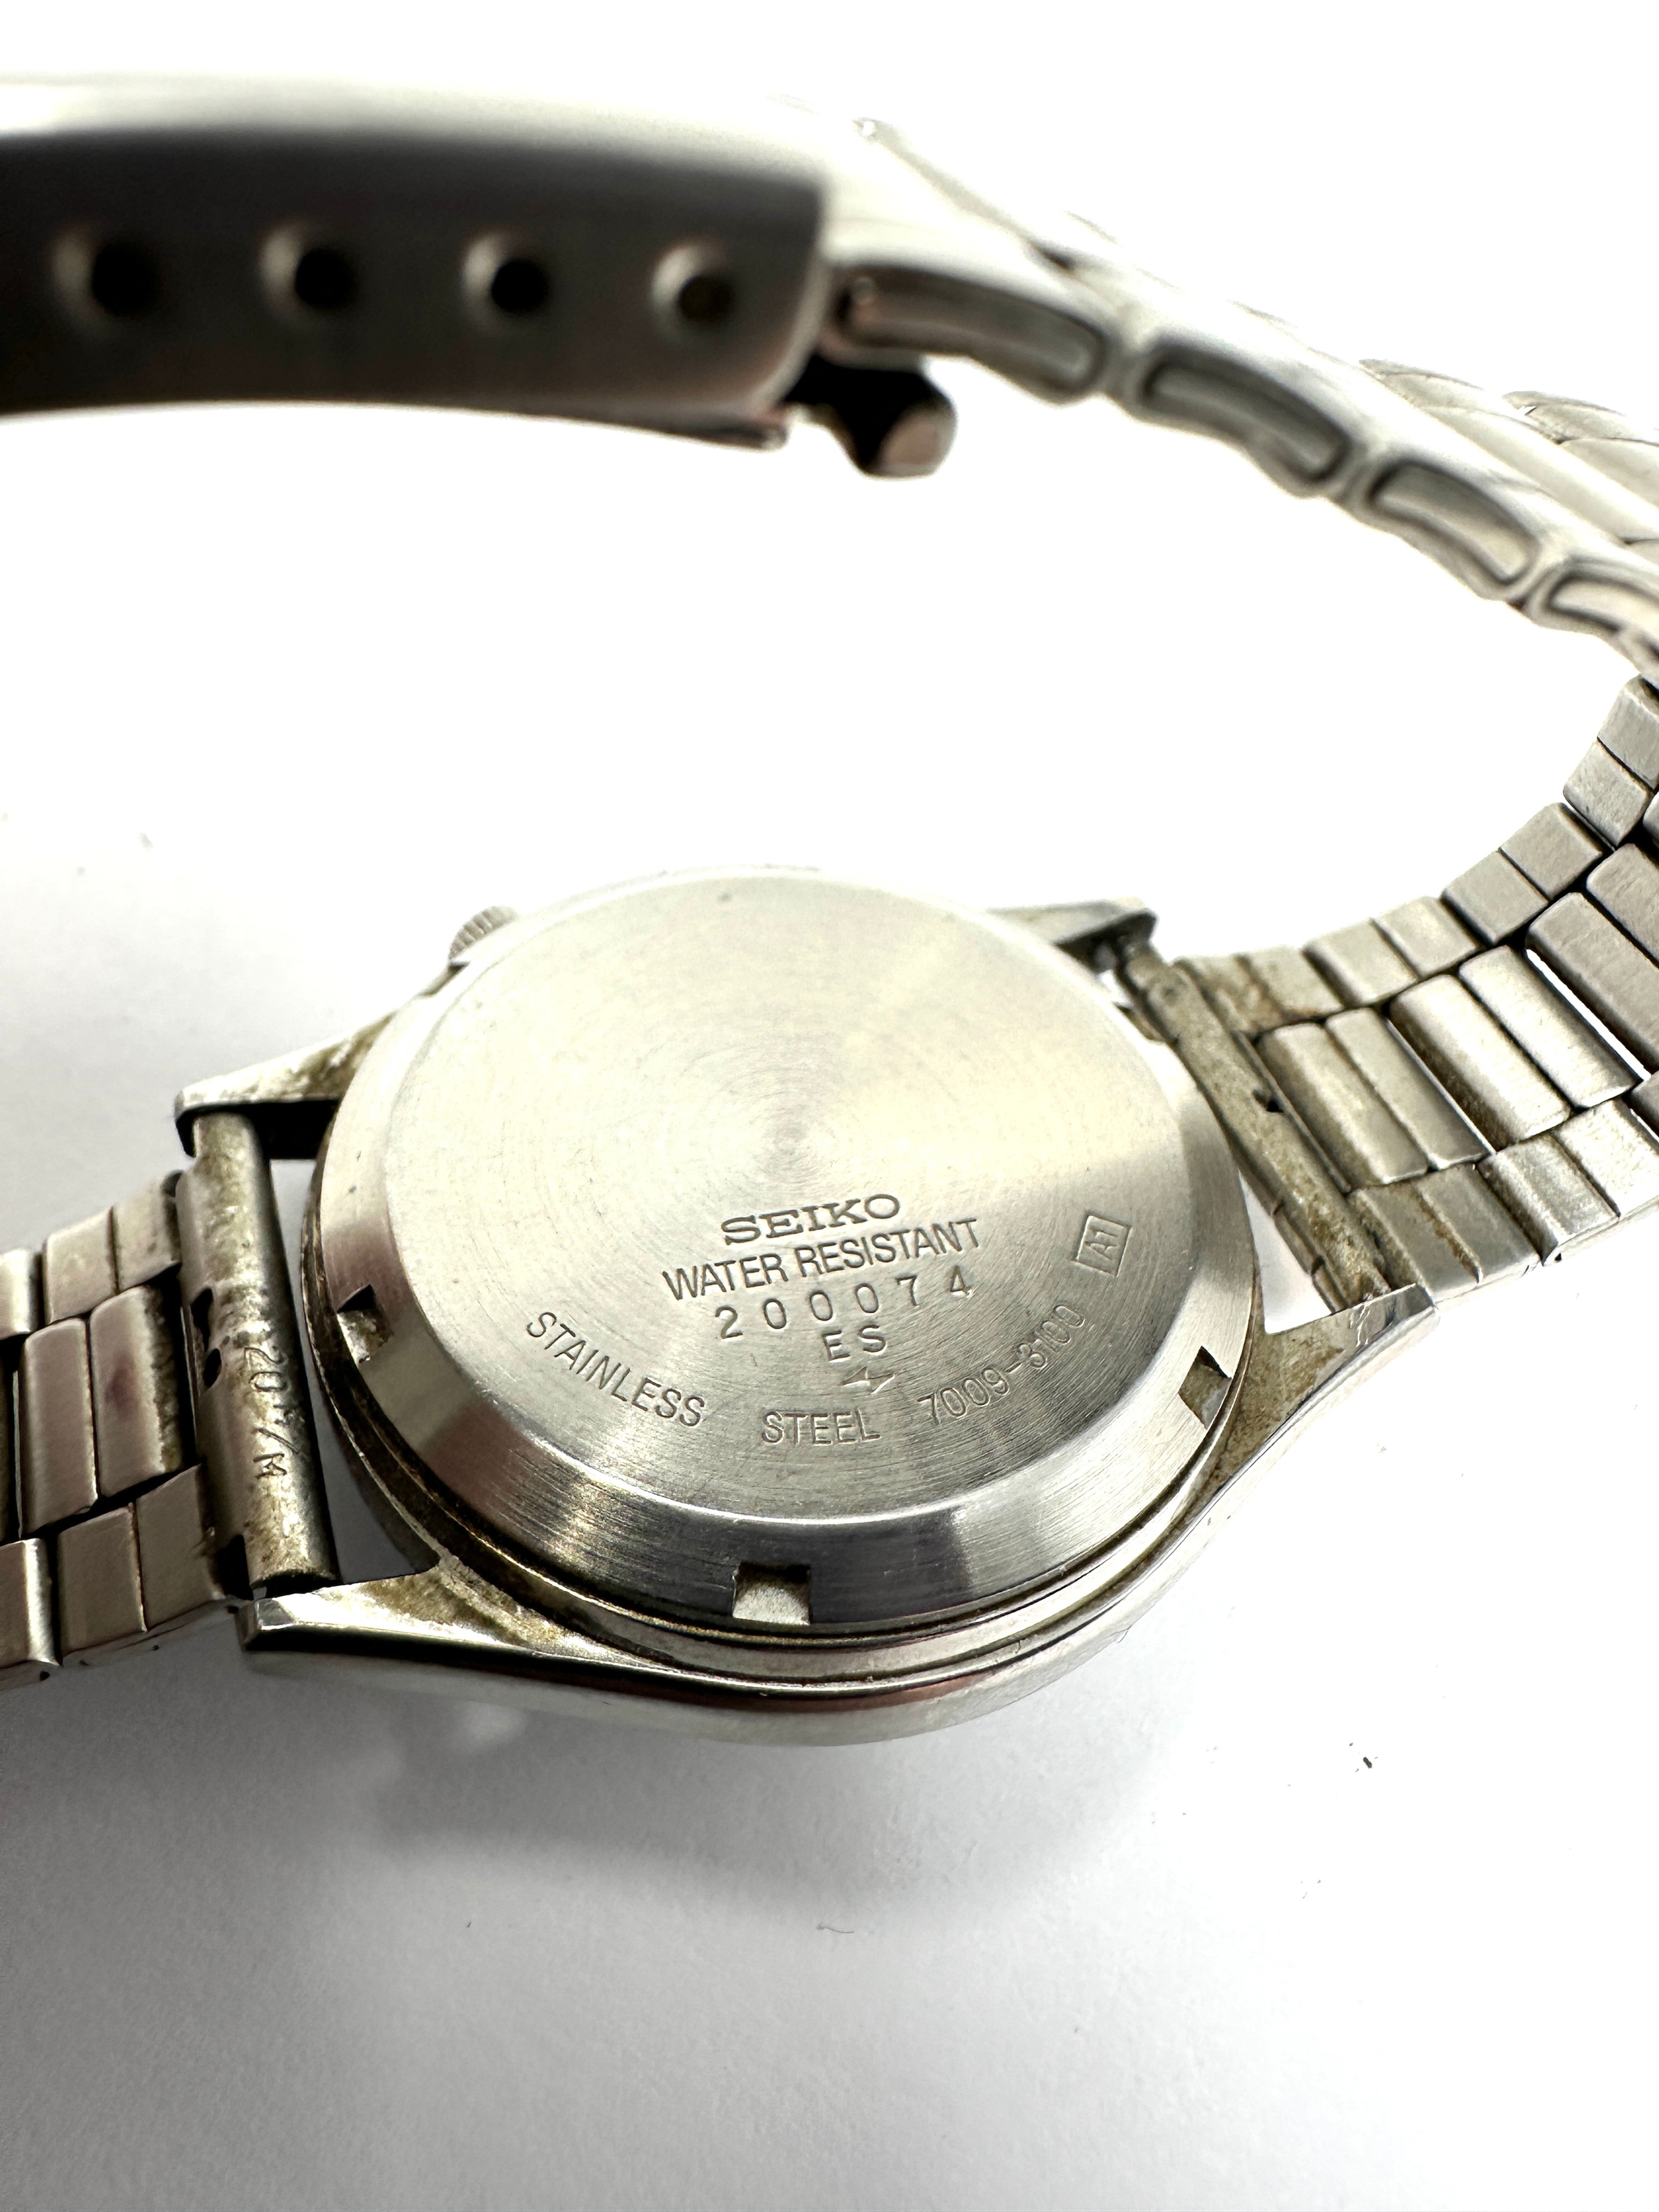 Vintage Seiko 5 Automatic Day & Date 7009 -3100 the watch is ticking black dial - Image 4 of 4